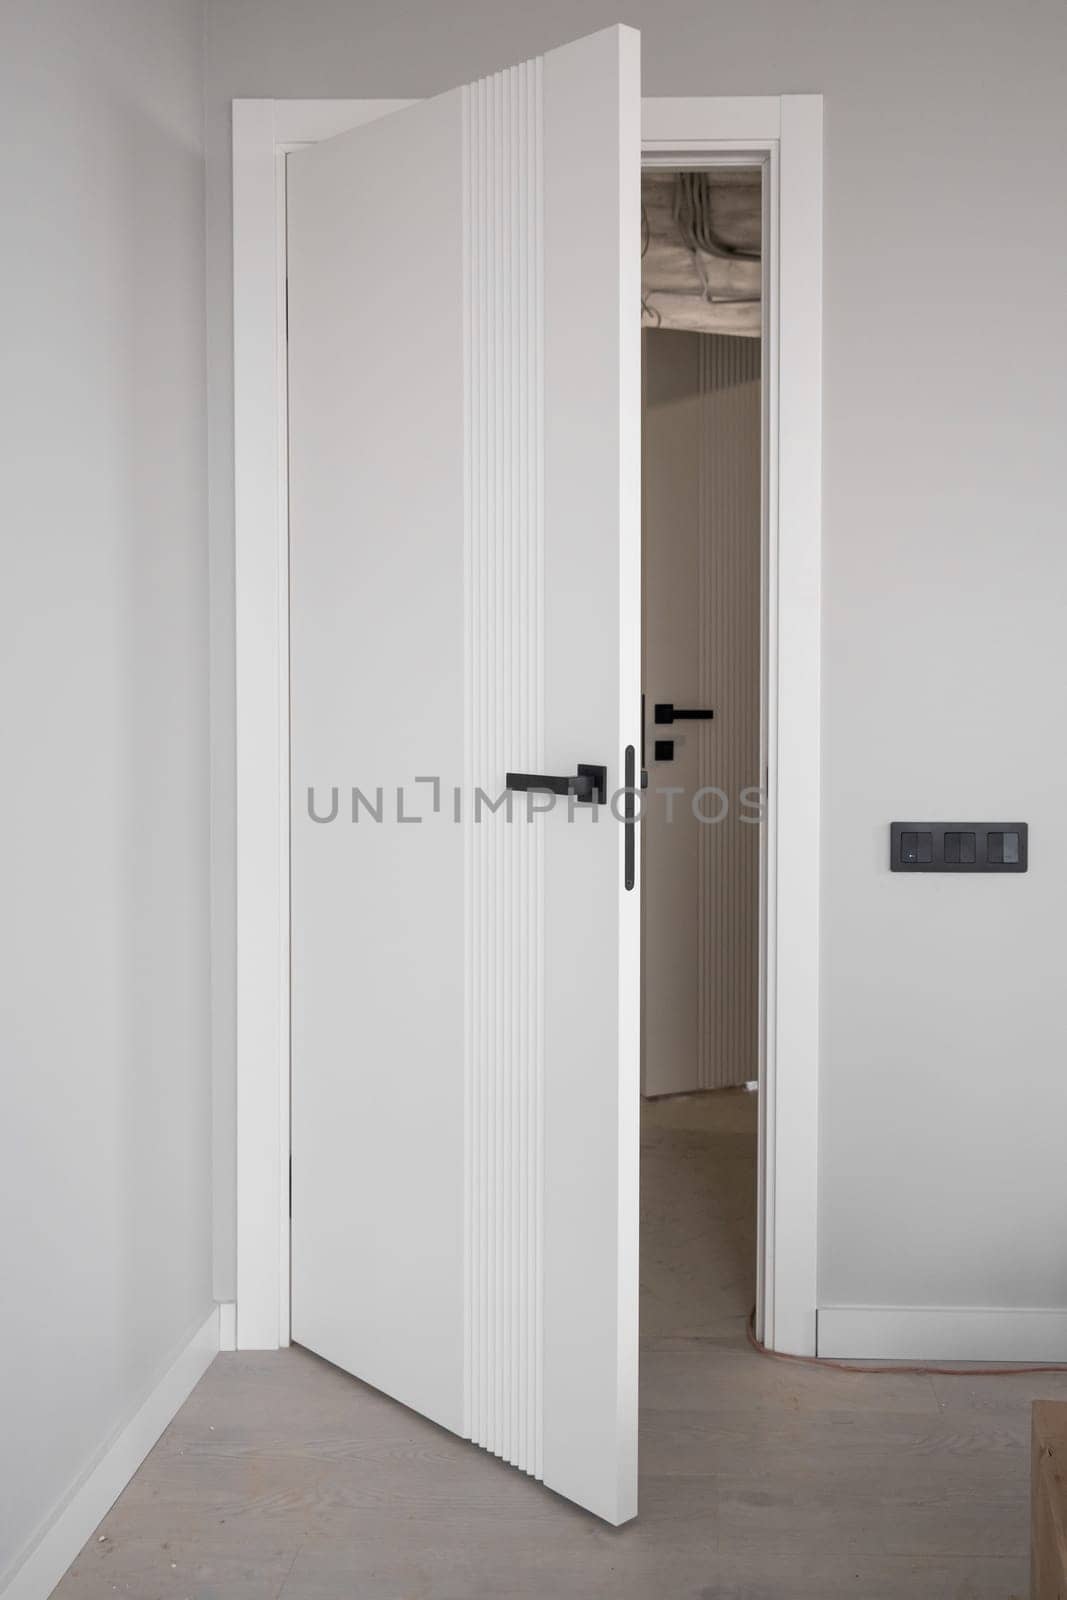 An open white door with a manual one in a renovated apartment. Moving to a new apartment. Doorknob on an open door with a ladder in the room during renovation and painting work.